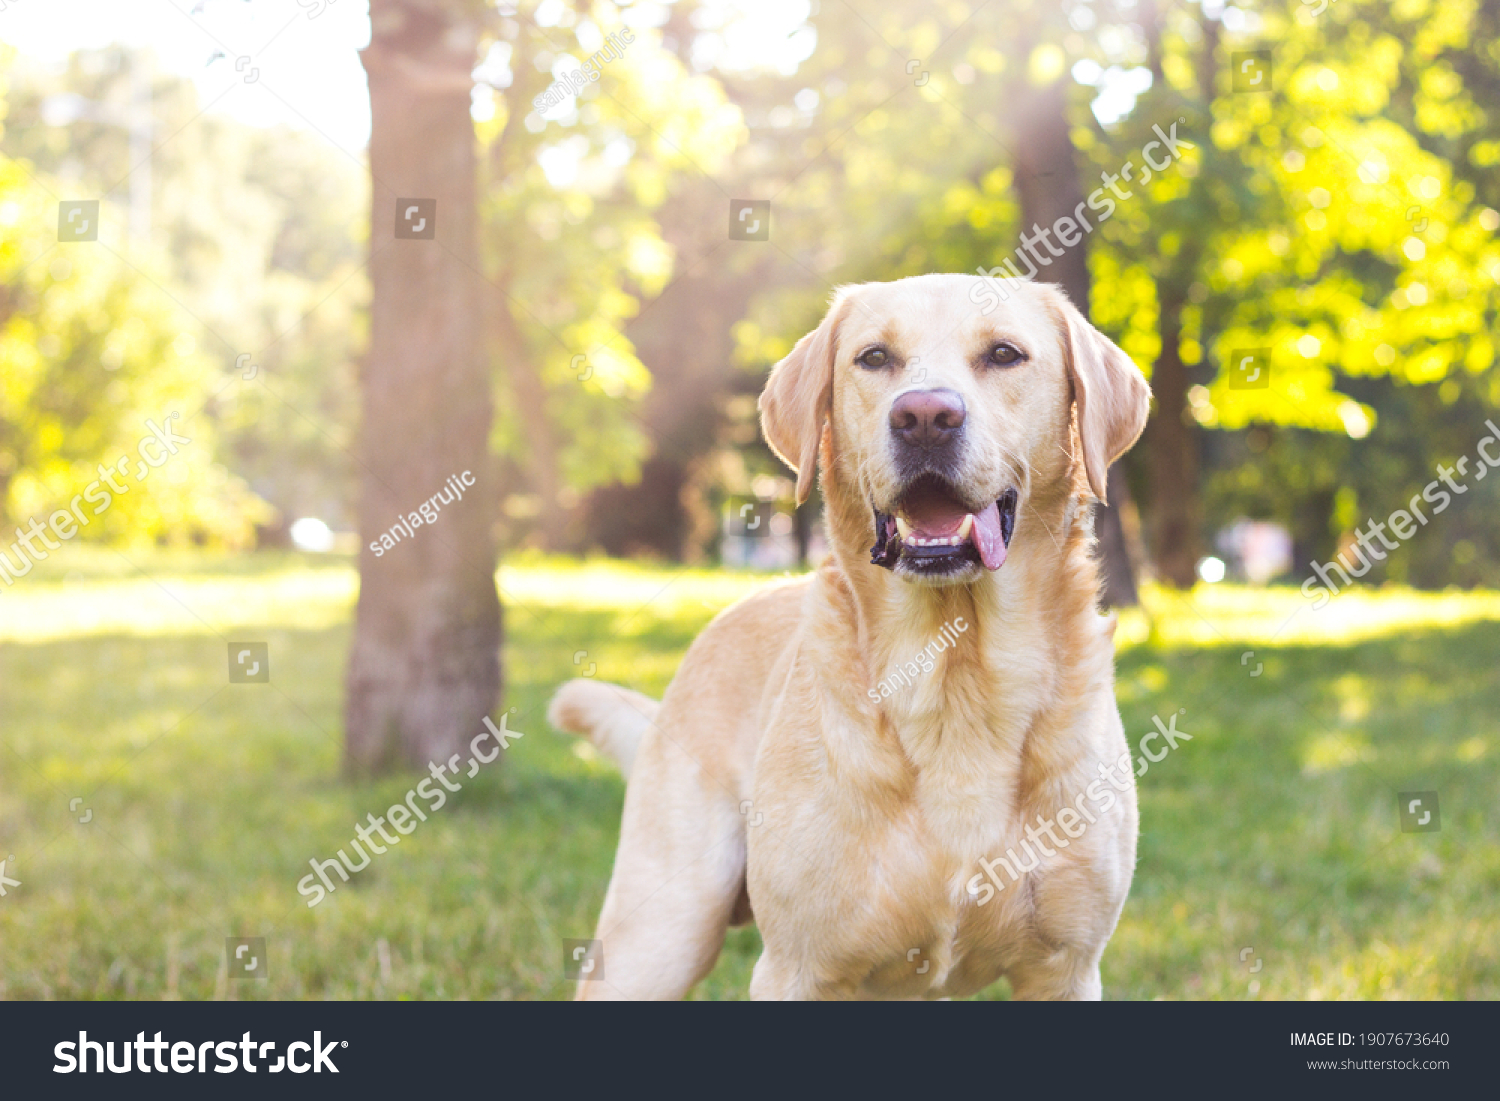 Smiling labrador dog in the city park portrait. Smiling and looking up, looking away #1907673640